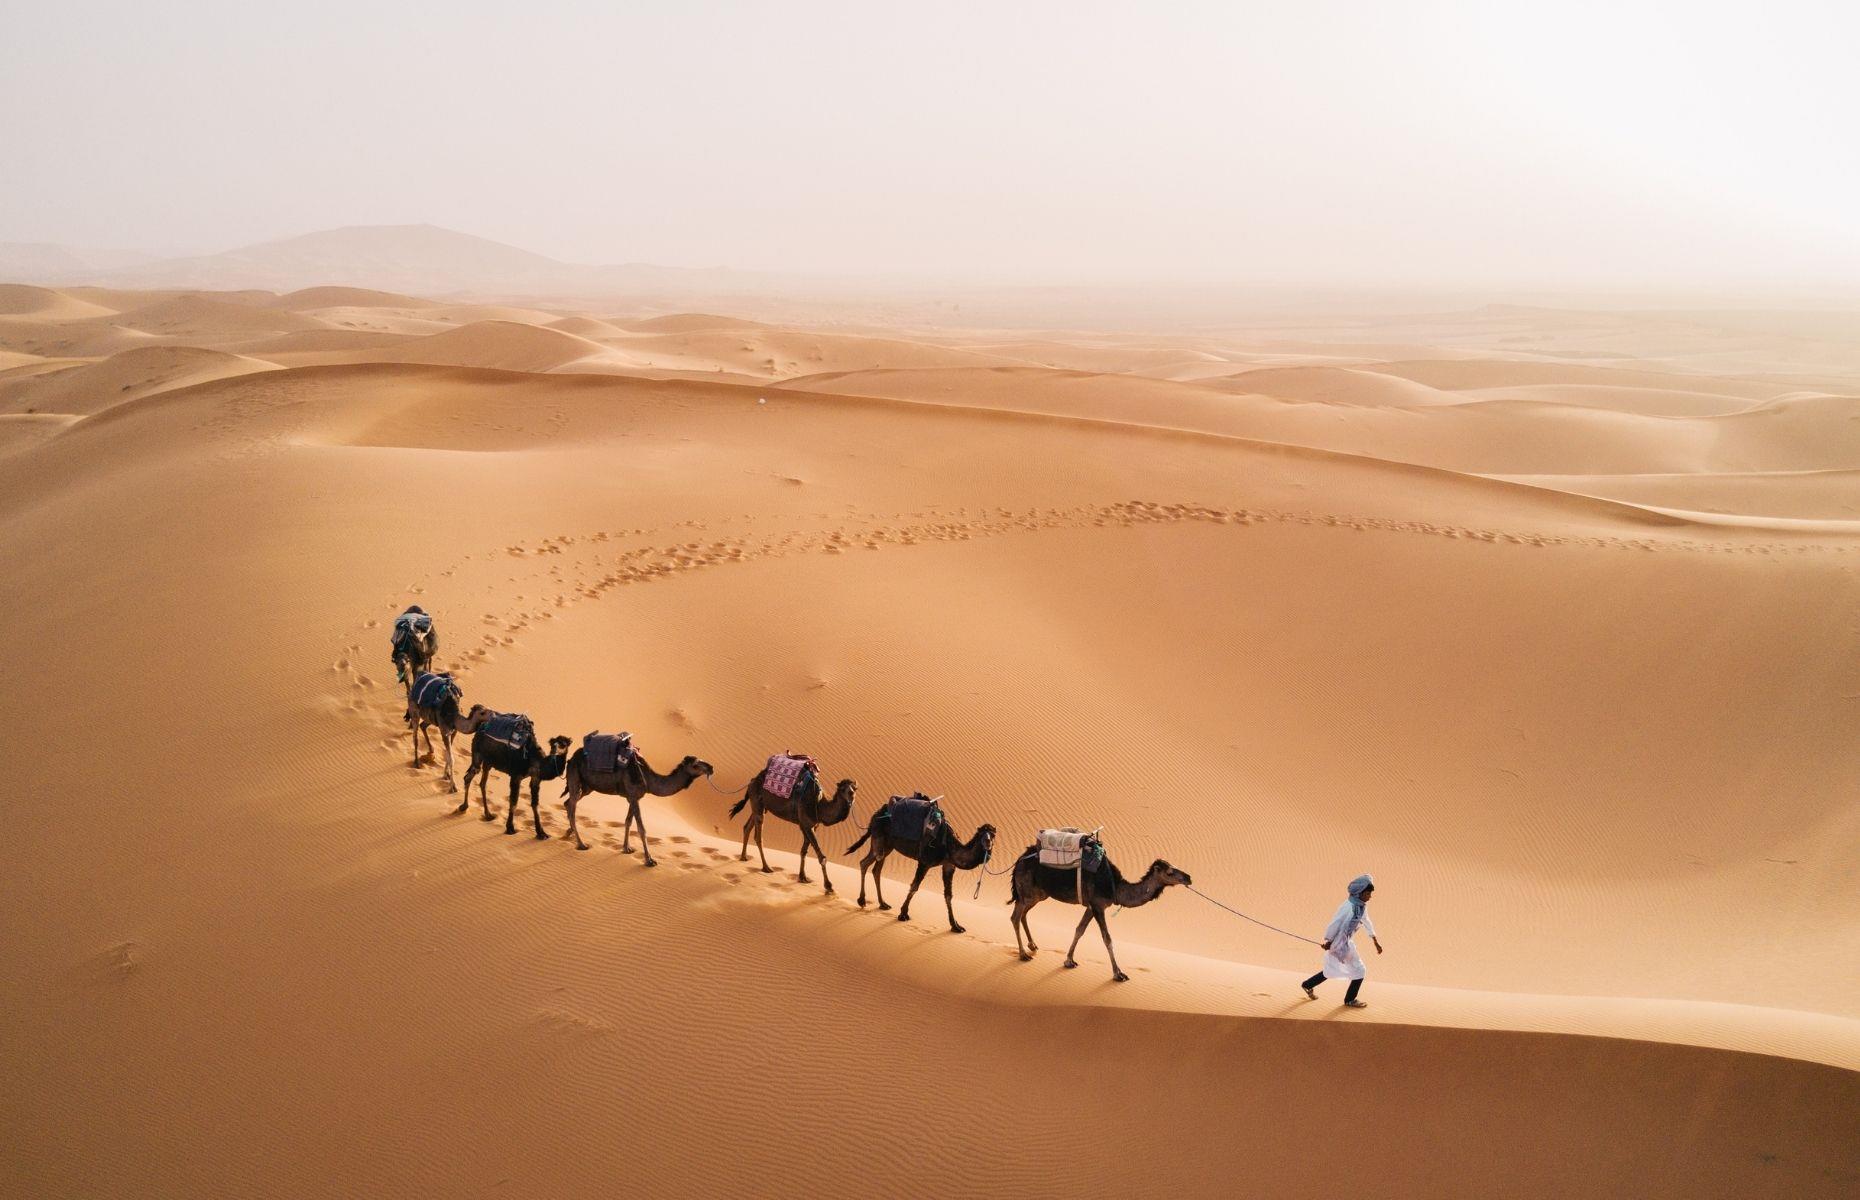 <p>Spanning 3.5 million square miles (9 million sq km), with temperatures reaching as high as 47°C (117°F), the Sahara Desert is one of the most inhospitable places in the world. Yet the Tuareg nomadic tribe thrive here, and have done since the 4th century. Until the mid-20th century, Tuareg people made a living through trade and were responsible for moving goods across the great desert. Yet, due to modern transport and political conflict, this way of life has slowly changed.</p>  <p><strong><a href="https://www.loveexploring.com/galleries/101150/the-worlds-most-wonderful-wildernesses">Discover jaw-dropping wildernesses around the globe</a></strong></p>